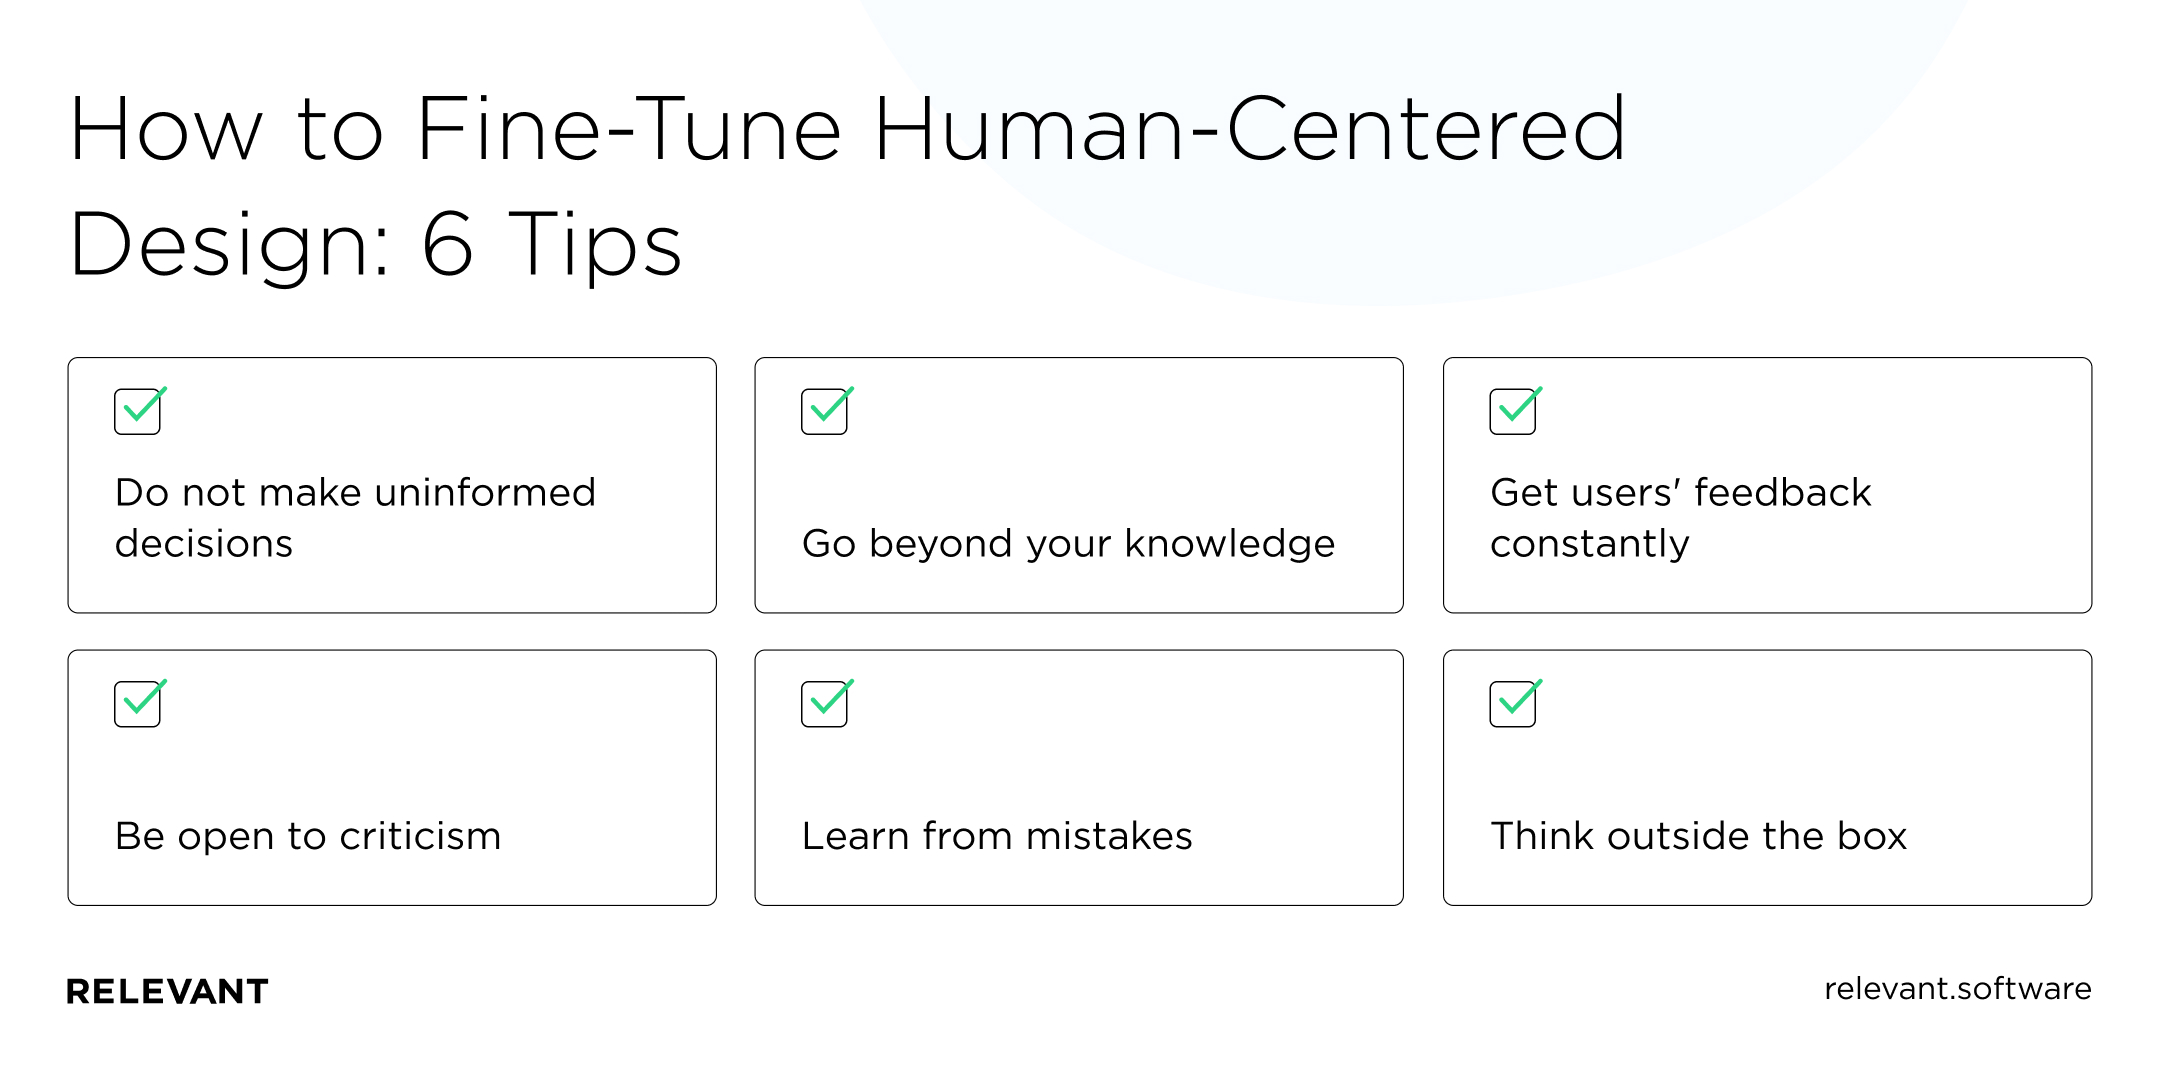 How to Fine-Tune Human-Centered Design: 5 Tips